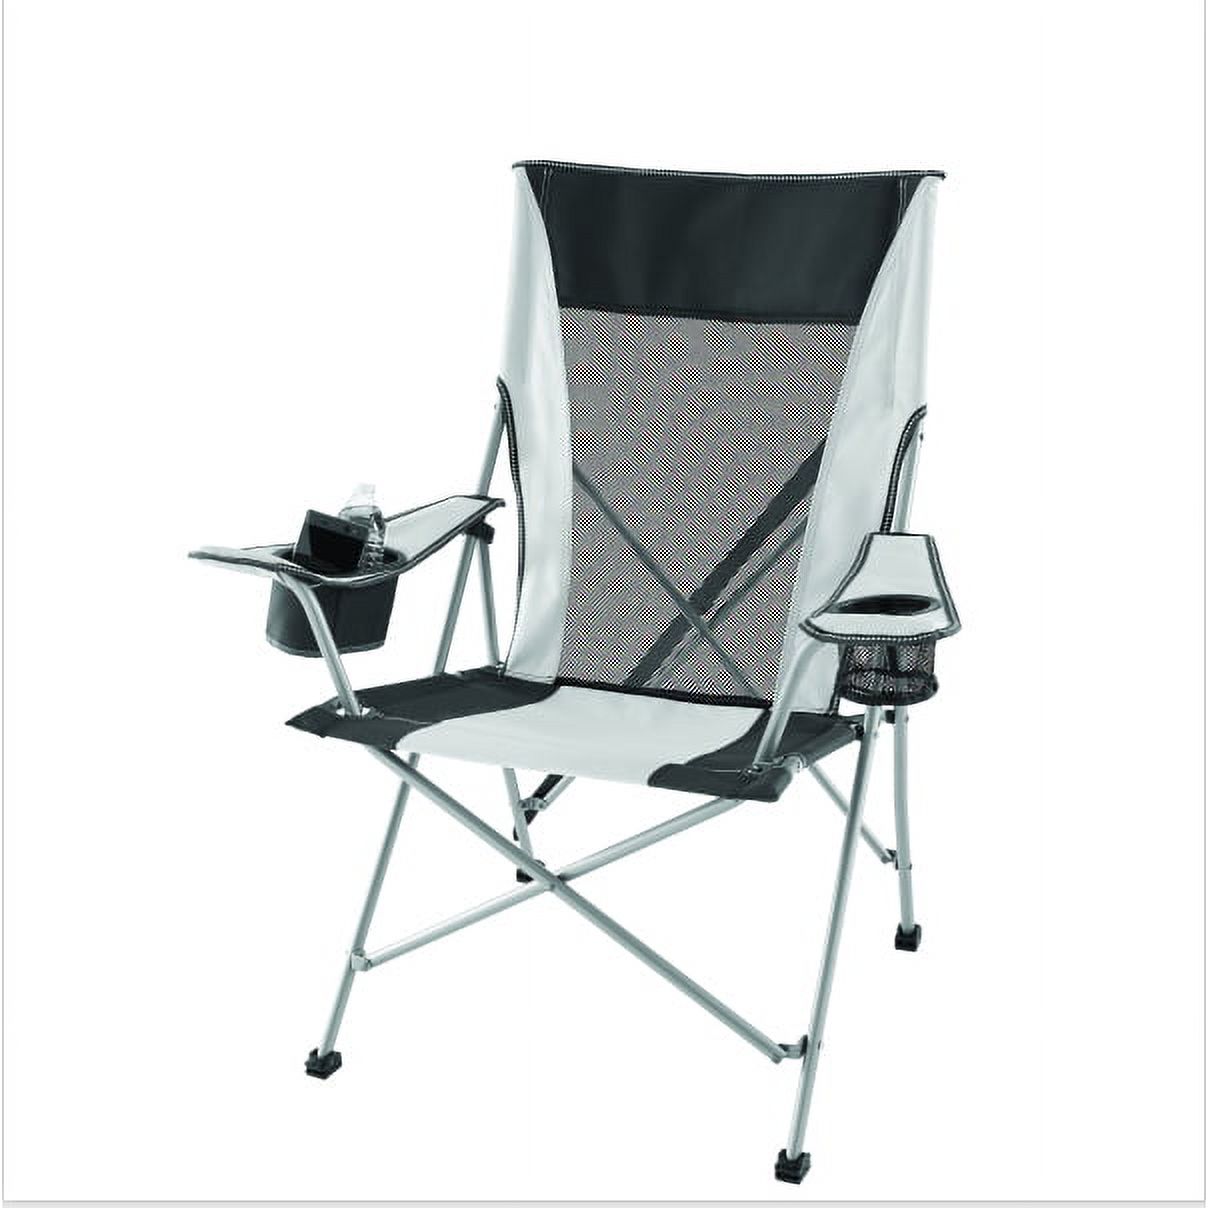 Ozark Trail Tension 2 in 1 Mesh Rocking Camp Chair, Gray and Black, Detachable Rockers, Adult - image 2 of 10